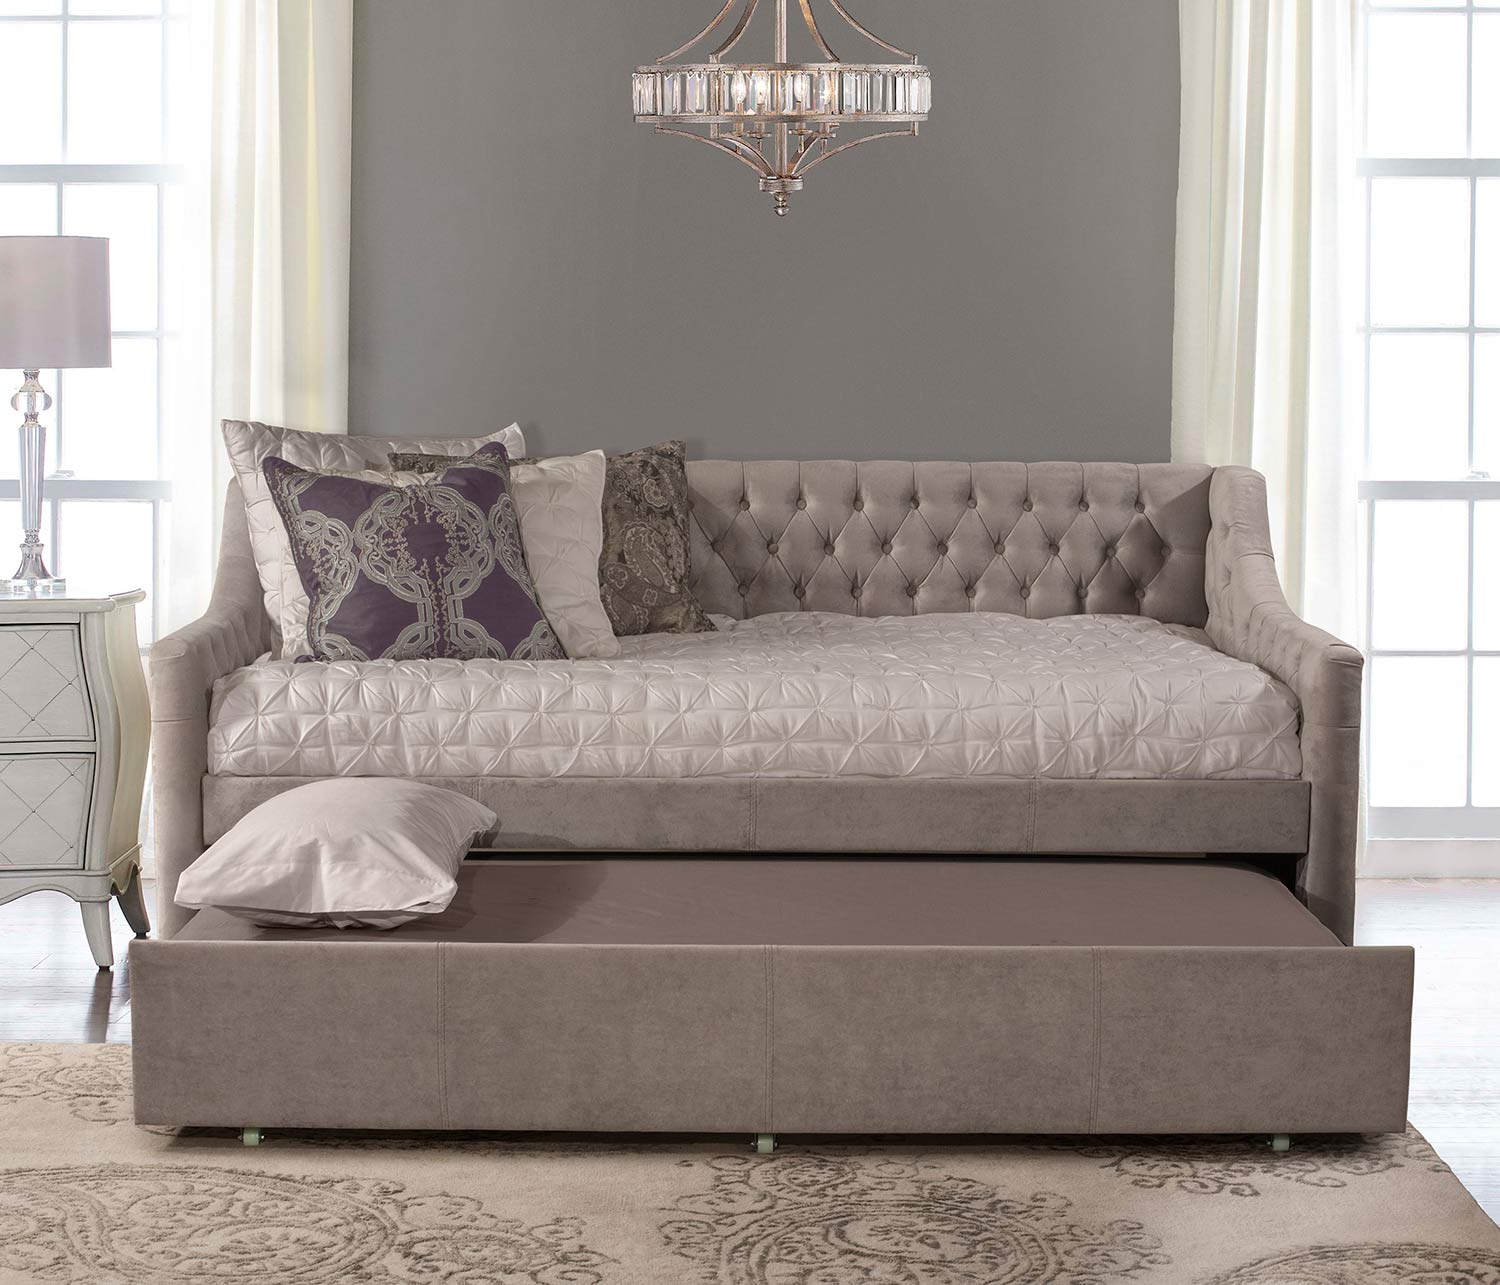 Hillsdale Jaylen Daybed with Trundle - Silver